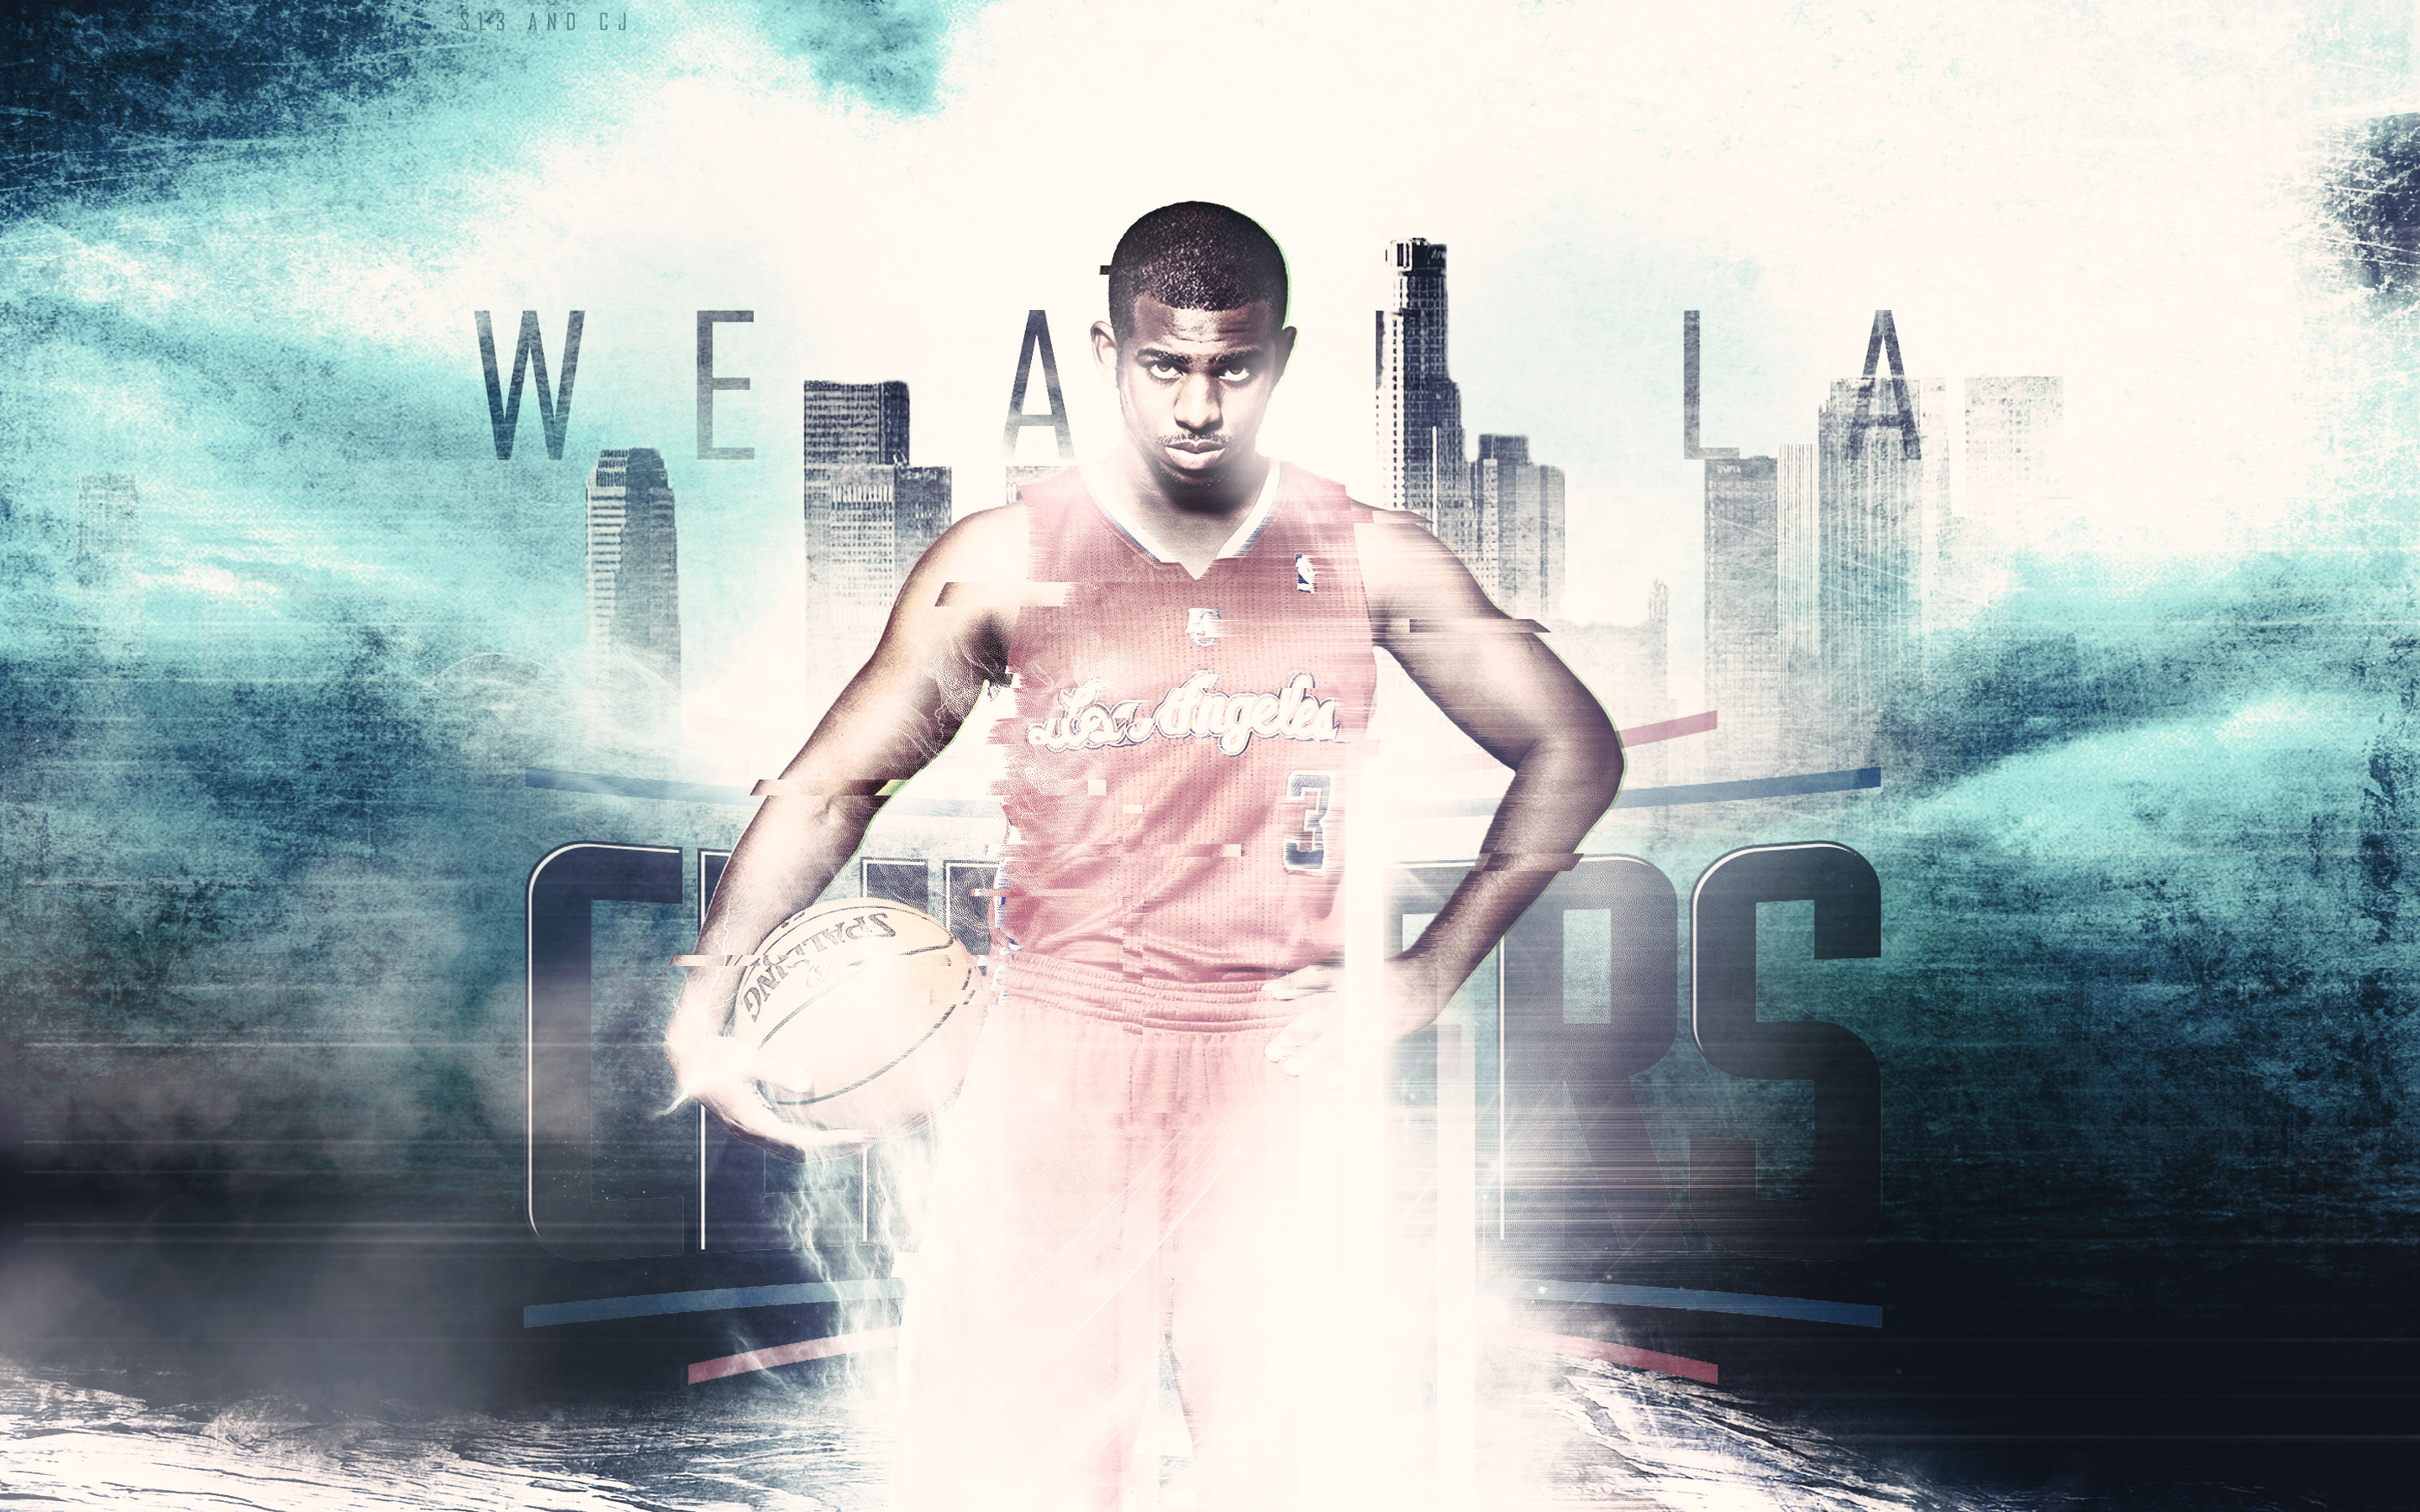 Chris Paul We Are La Clippers Wallpaper Basketball At